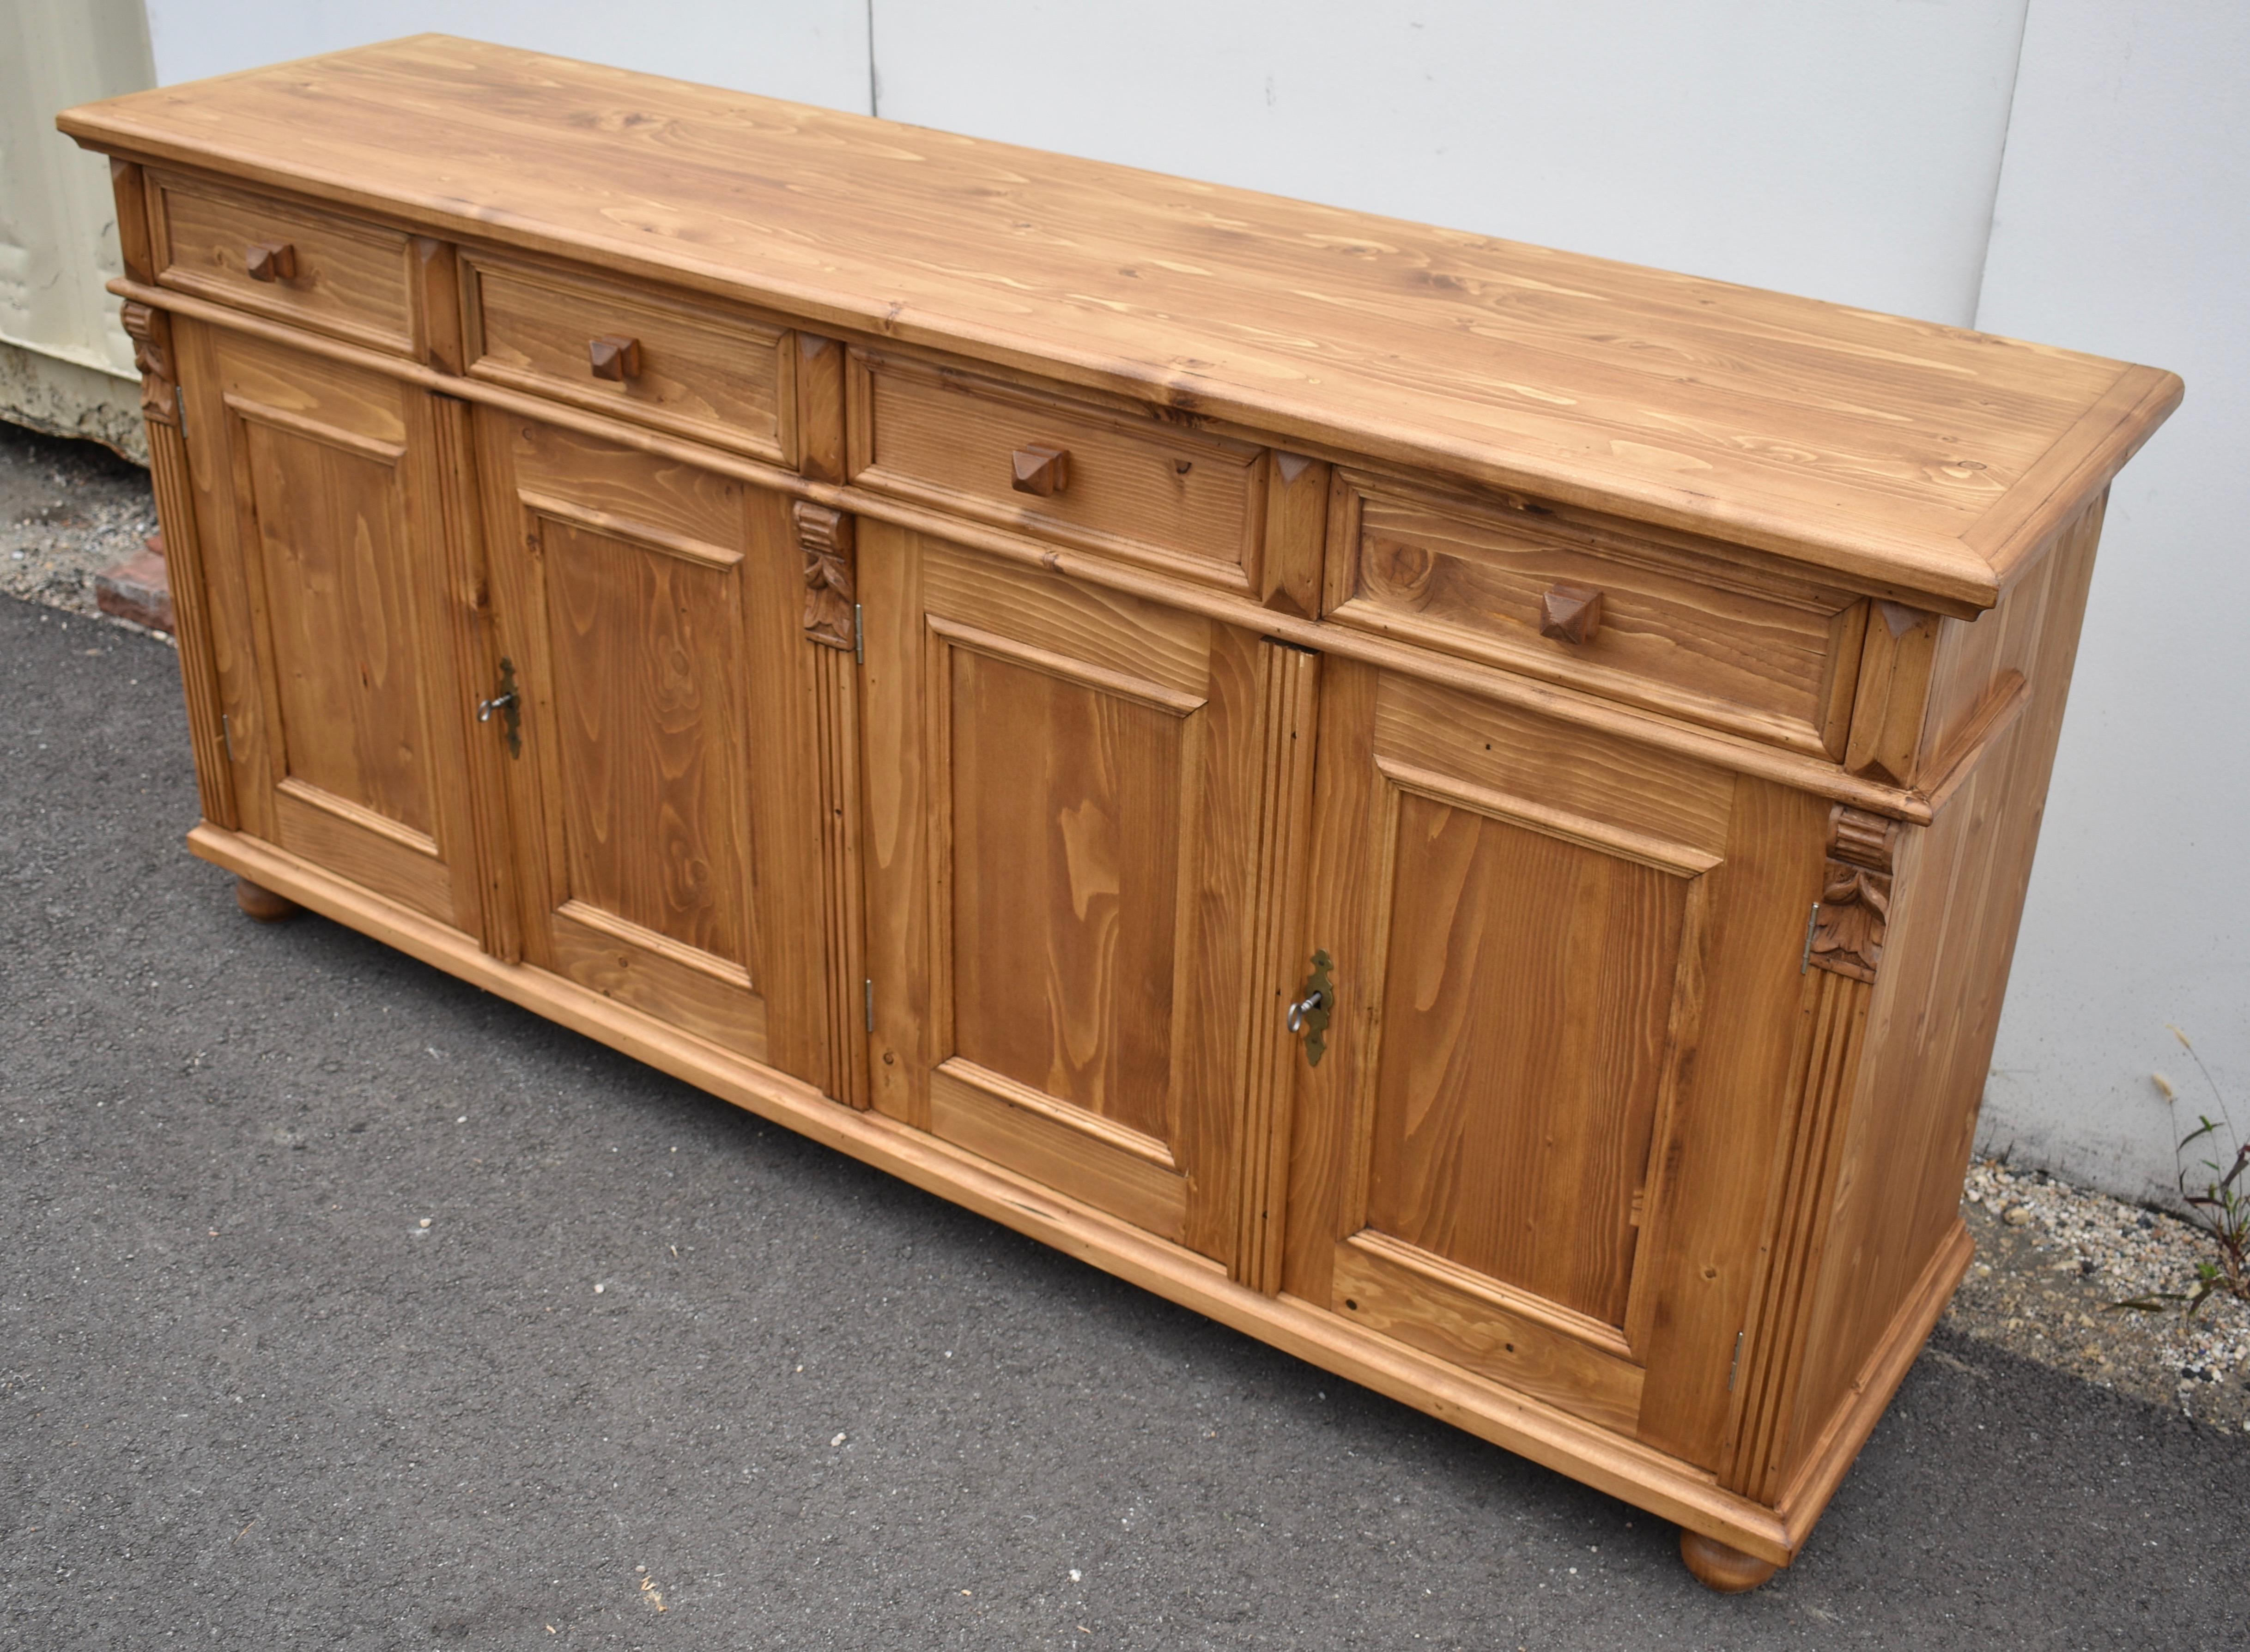 Polished Pine Four Door Sideboard, Reproduction.